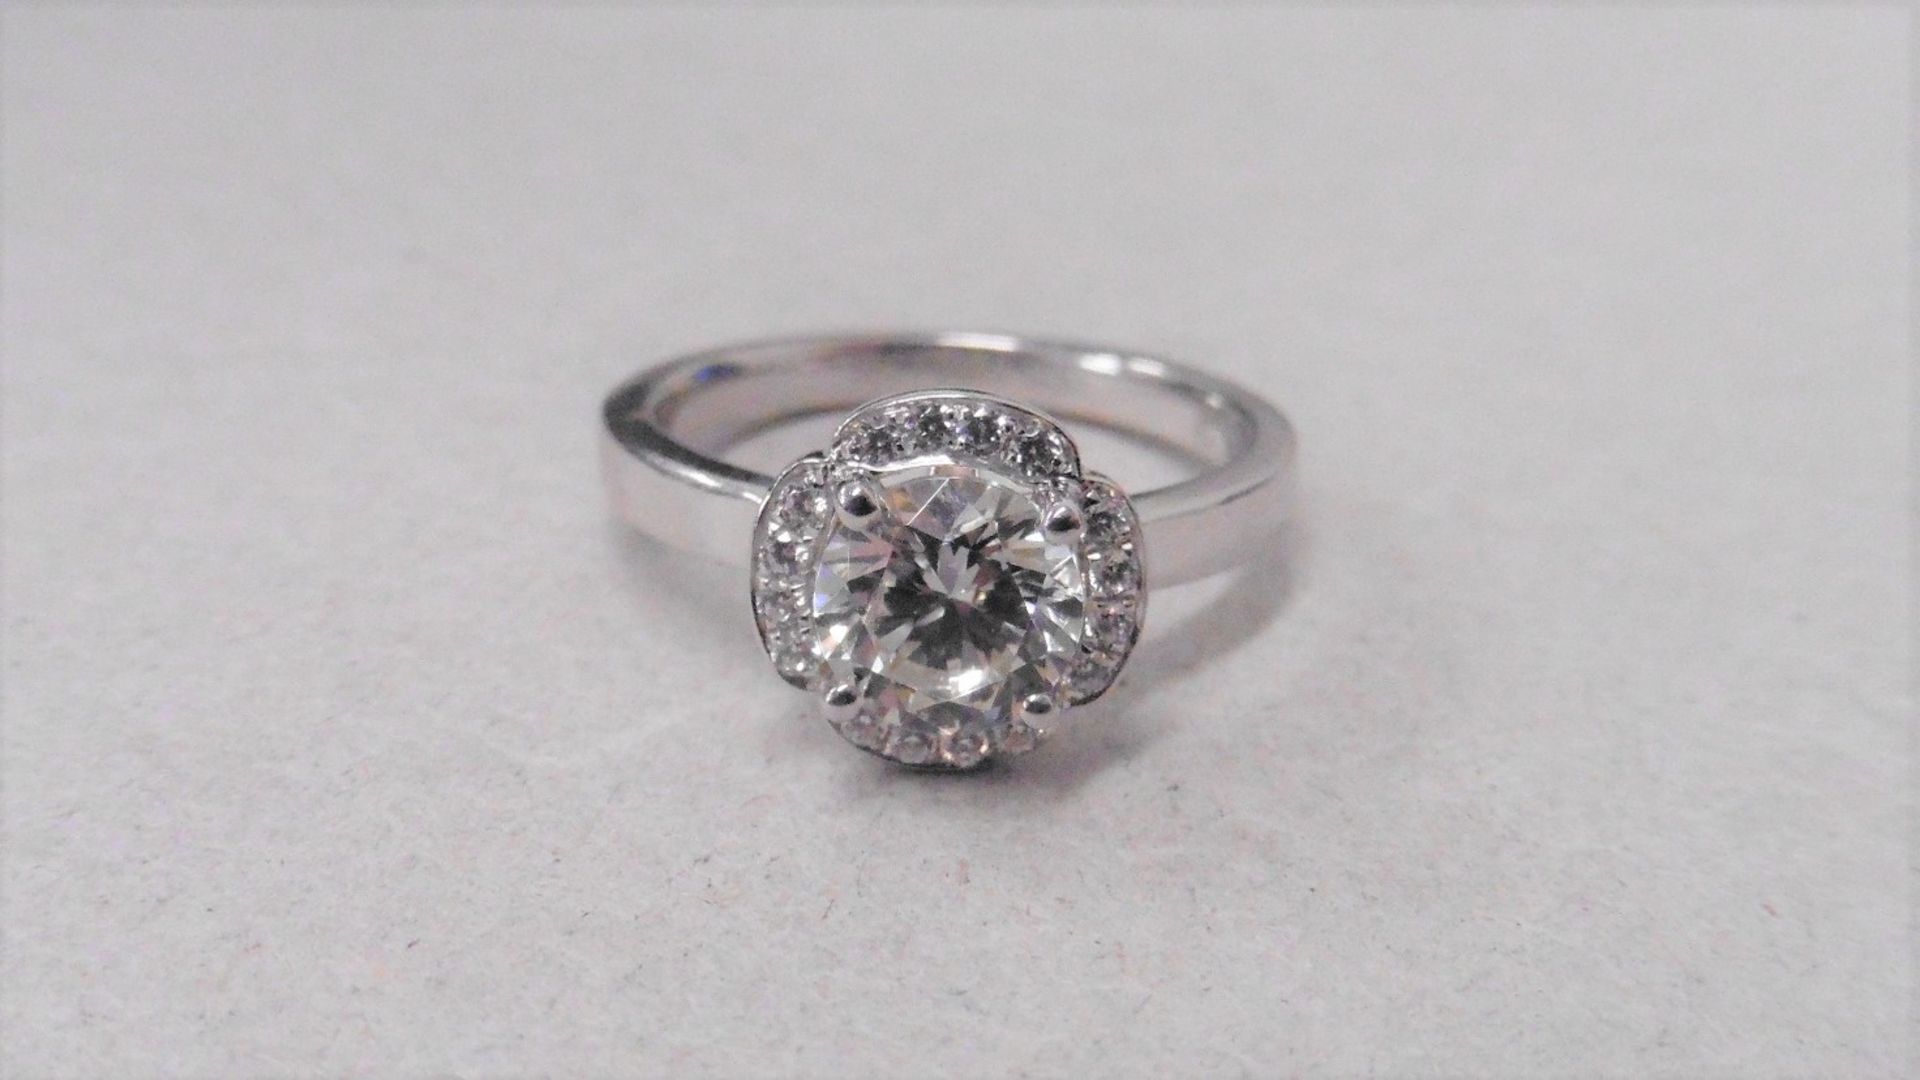 1.04ct diamond set soliatire ring in platinum. H colour and I1 clarity. Halo setting small - Image 3 of 3